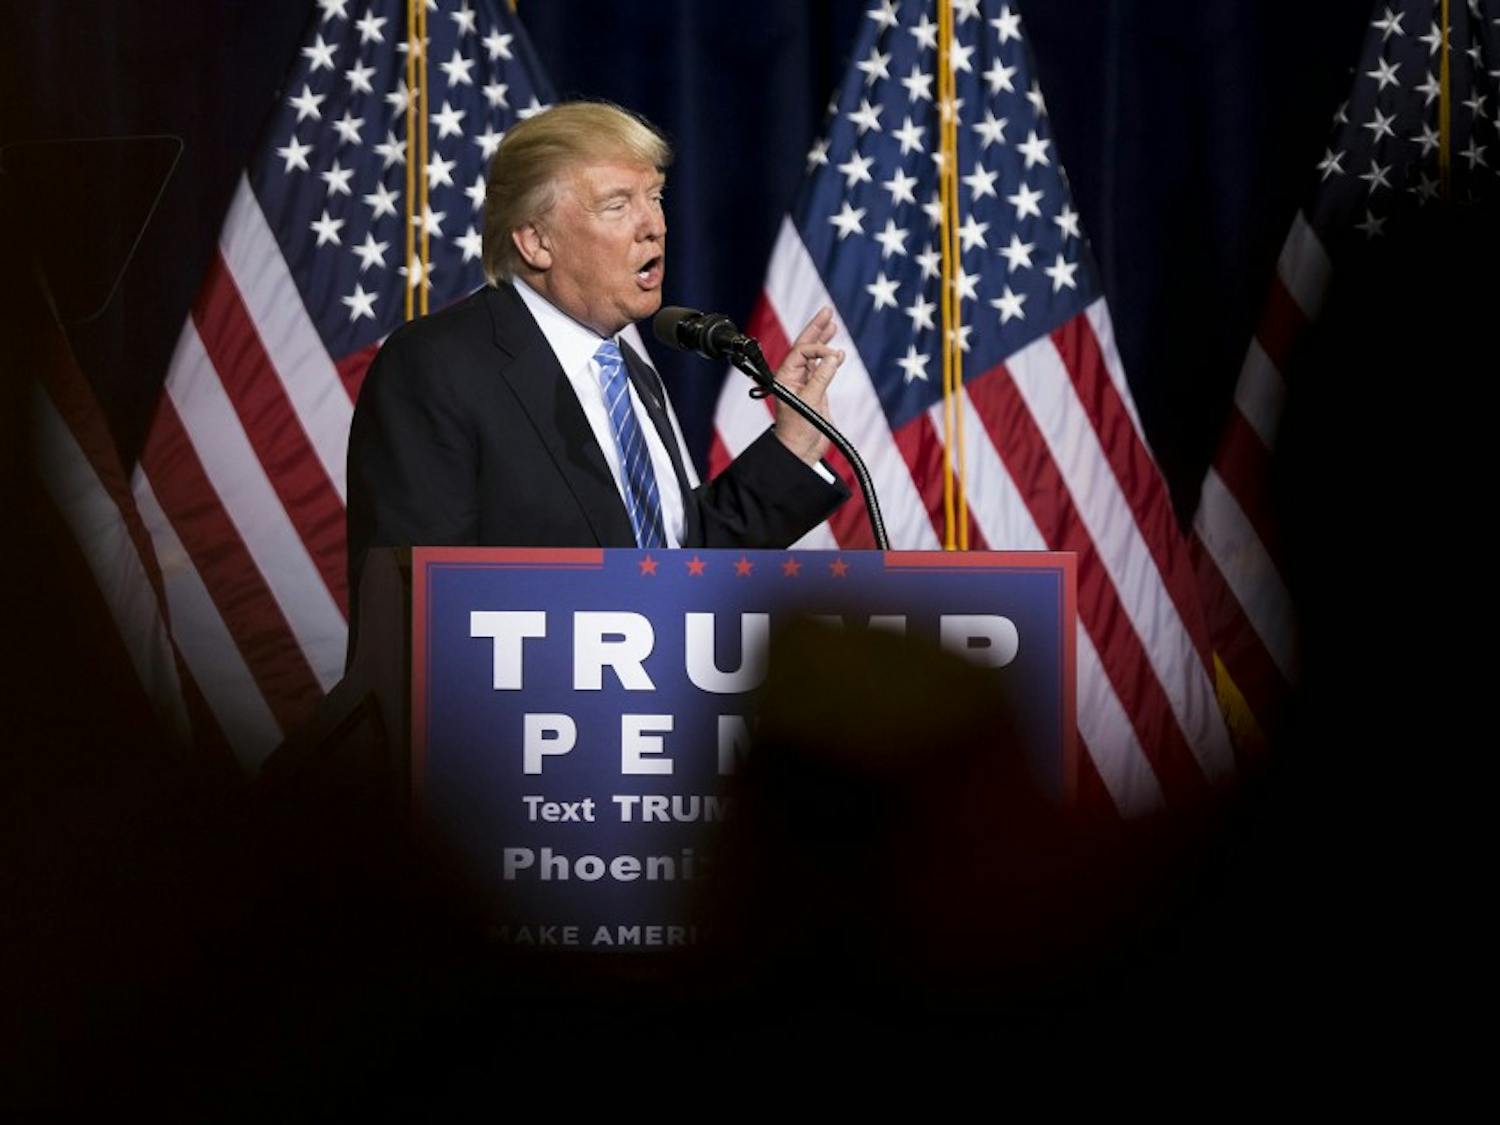 Trump outlines immigration plan in Downtown Phoenix event